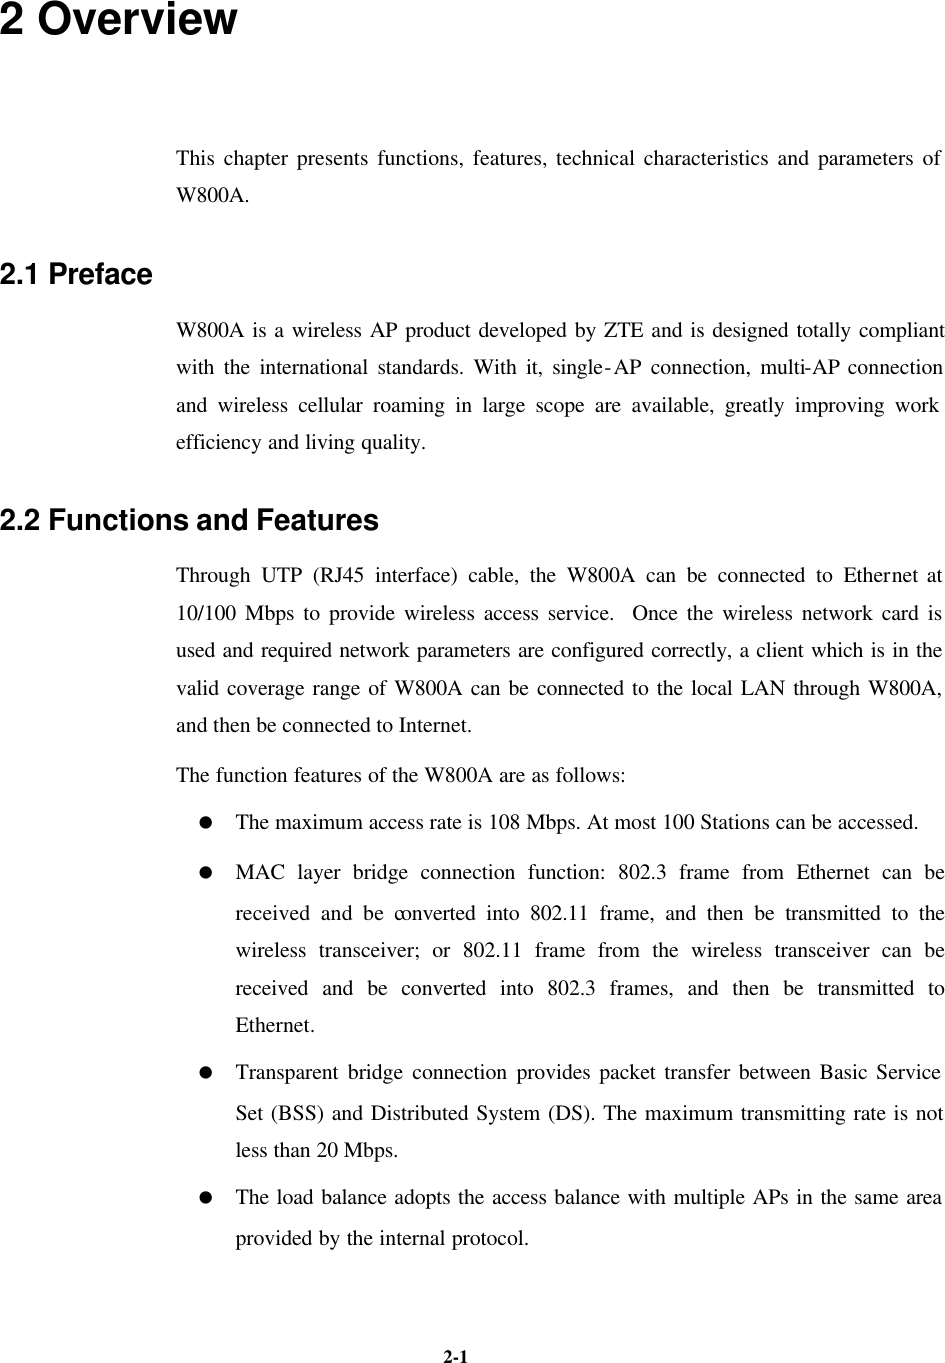   2-1 2 Overview This chapter presents functions, features, technical characteristics and parameters of W800A.   2.1 Preface W800A is a wireless AP product developed by ZTE and is designed totally compliant with the international standards. With it, single-AP connection, multi-AP connection and wireless cellular roaming in large scope are available, greatly improving work efficiency and living quality.   2.2 Functions and Features Through UTP (RJ45 interface) cable, the W800A can be connected to Ethernet at 10/100 Mbps to provide wireless access service.  Once the wireless network card is used and required network parameters are configured correctly, a client which is in the valid coverage range of W800A can be connected to the local LAN through W800A, and then be connected to Internet.   The function features of the W800A are as follows: = The maximum access rate is 108 Mbps. At most 100 Stations can be accessed.   = MAC layer bridge connection function: 802.3 frame from Ethernet can be received and be converted into 802.11 frame, and then be transmitted to the wireless transceiver; or 802.11 frame from the wireless transceiver can be received and be converted into 802.3 frames, and then be transmitted to Ethernet.   = Transparent bridge connection provides packet transfer between Basic Service Set (BSS) and Distributed System (DS). The maximum transmitting rate is not less than 20 Mbps.   = The load balance adopts the access balance with multiple APs in the same area provided by the internal protocol.    